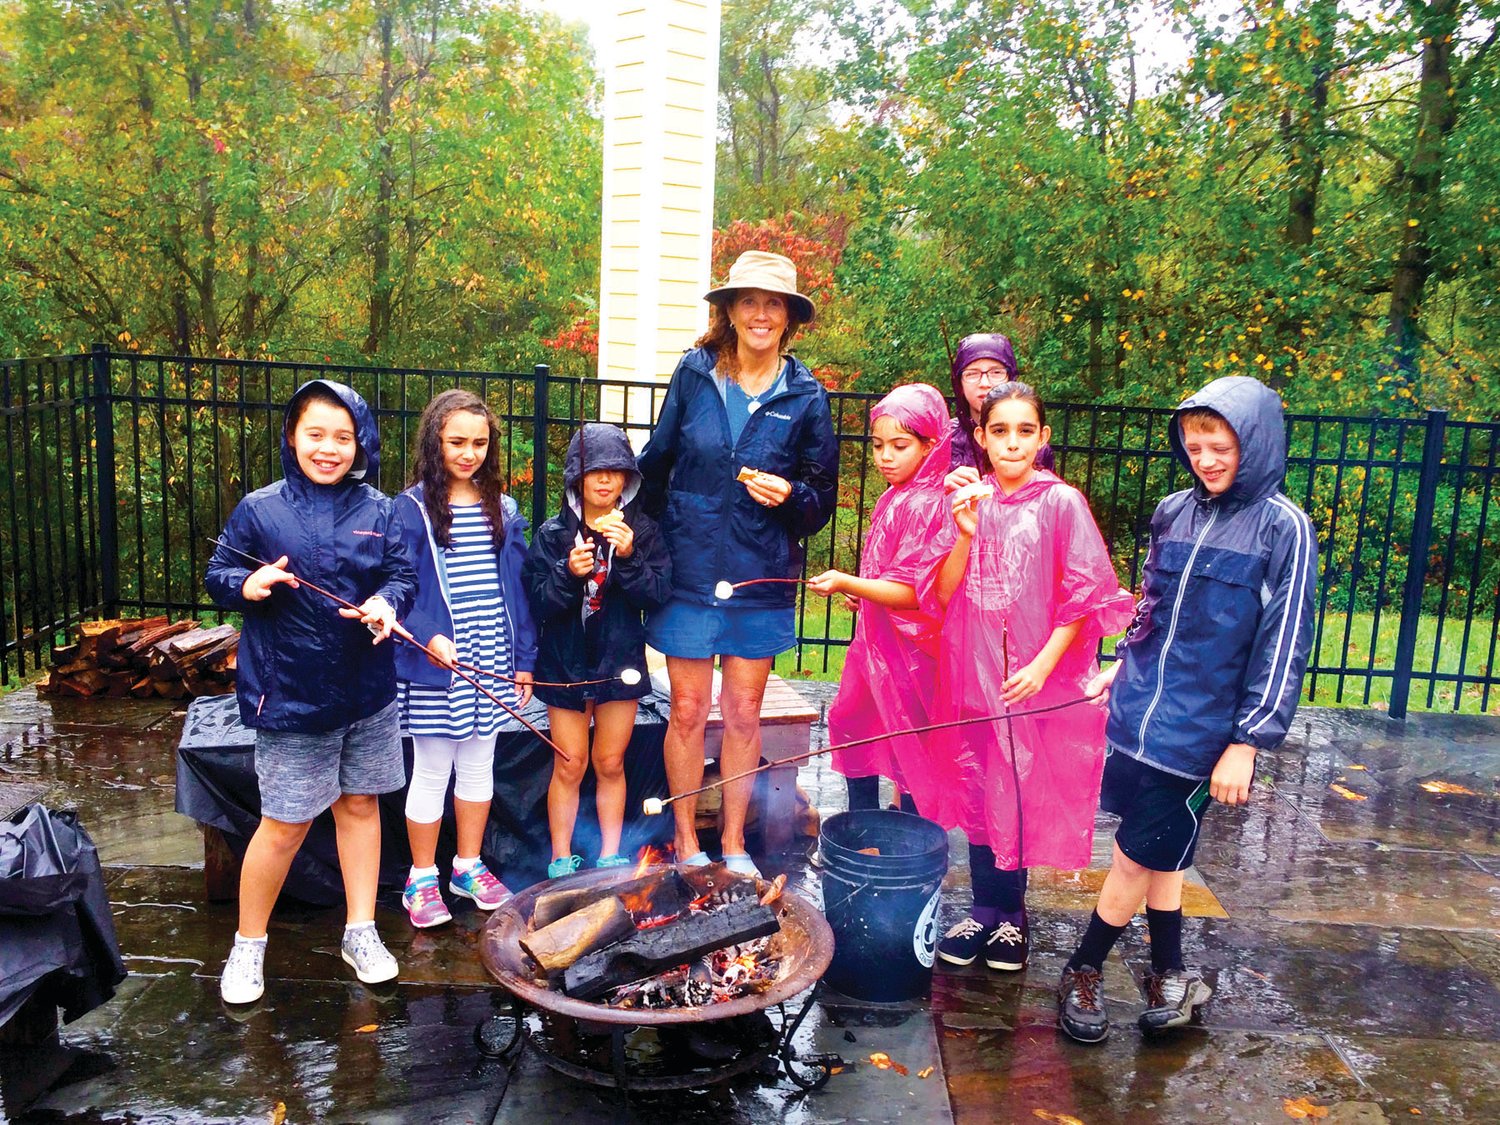 Patricia Walsh-Collins, founder and director of Earth School, roasts marshmallows with children during a rainy day outside.